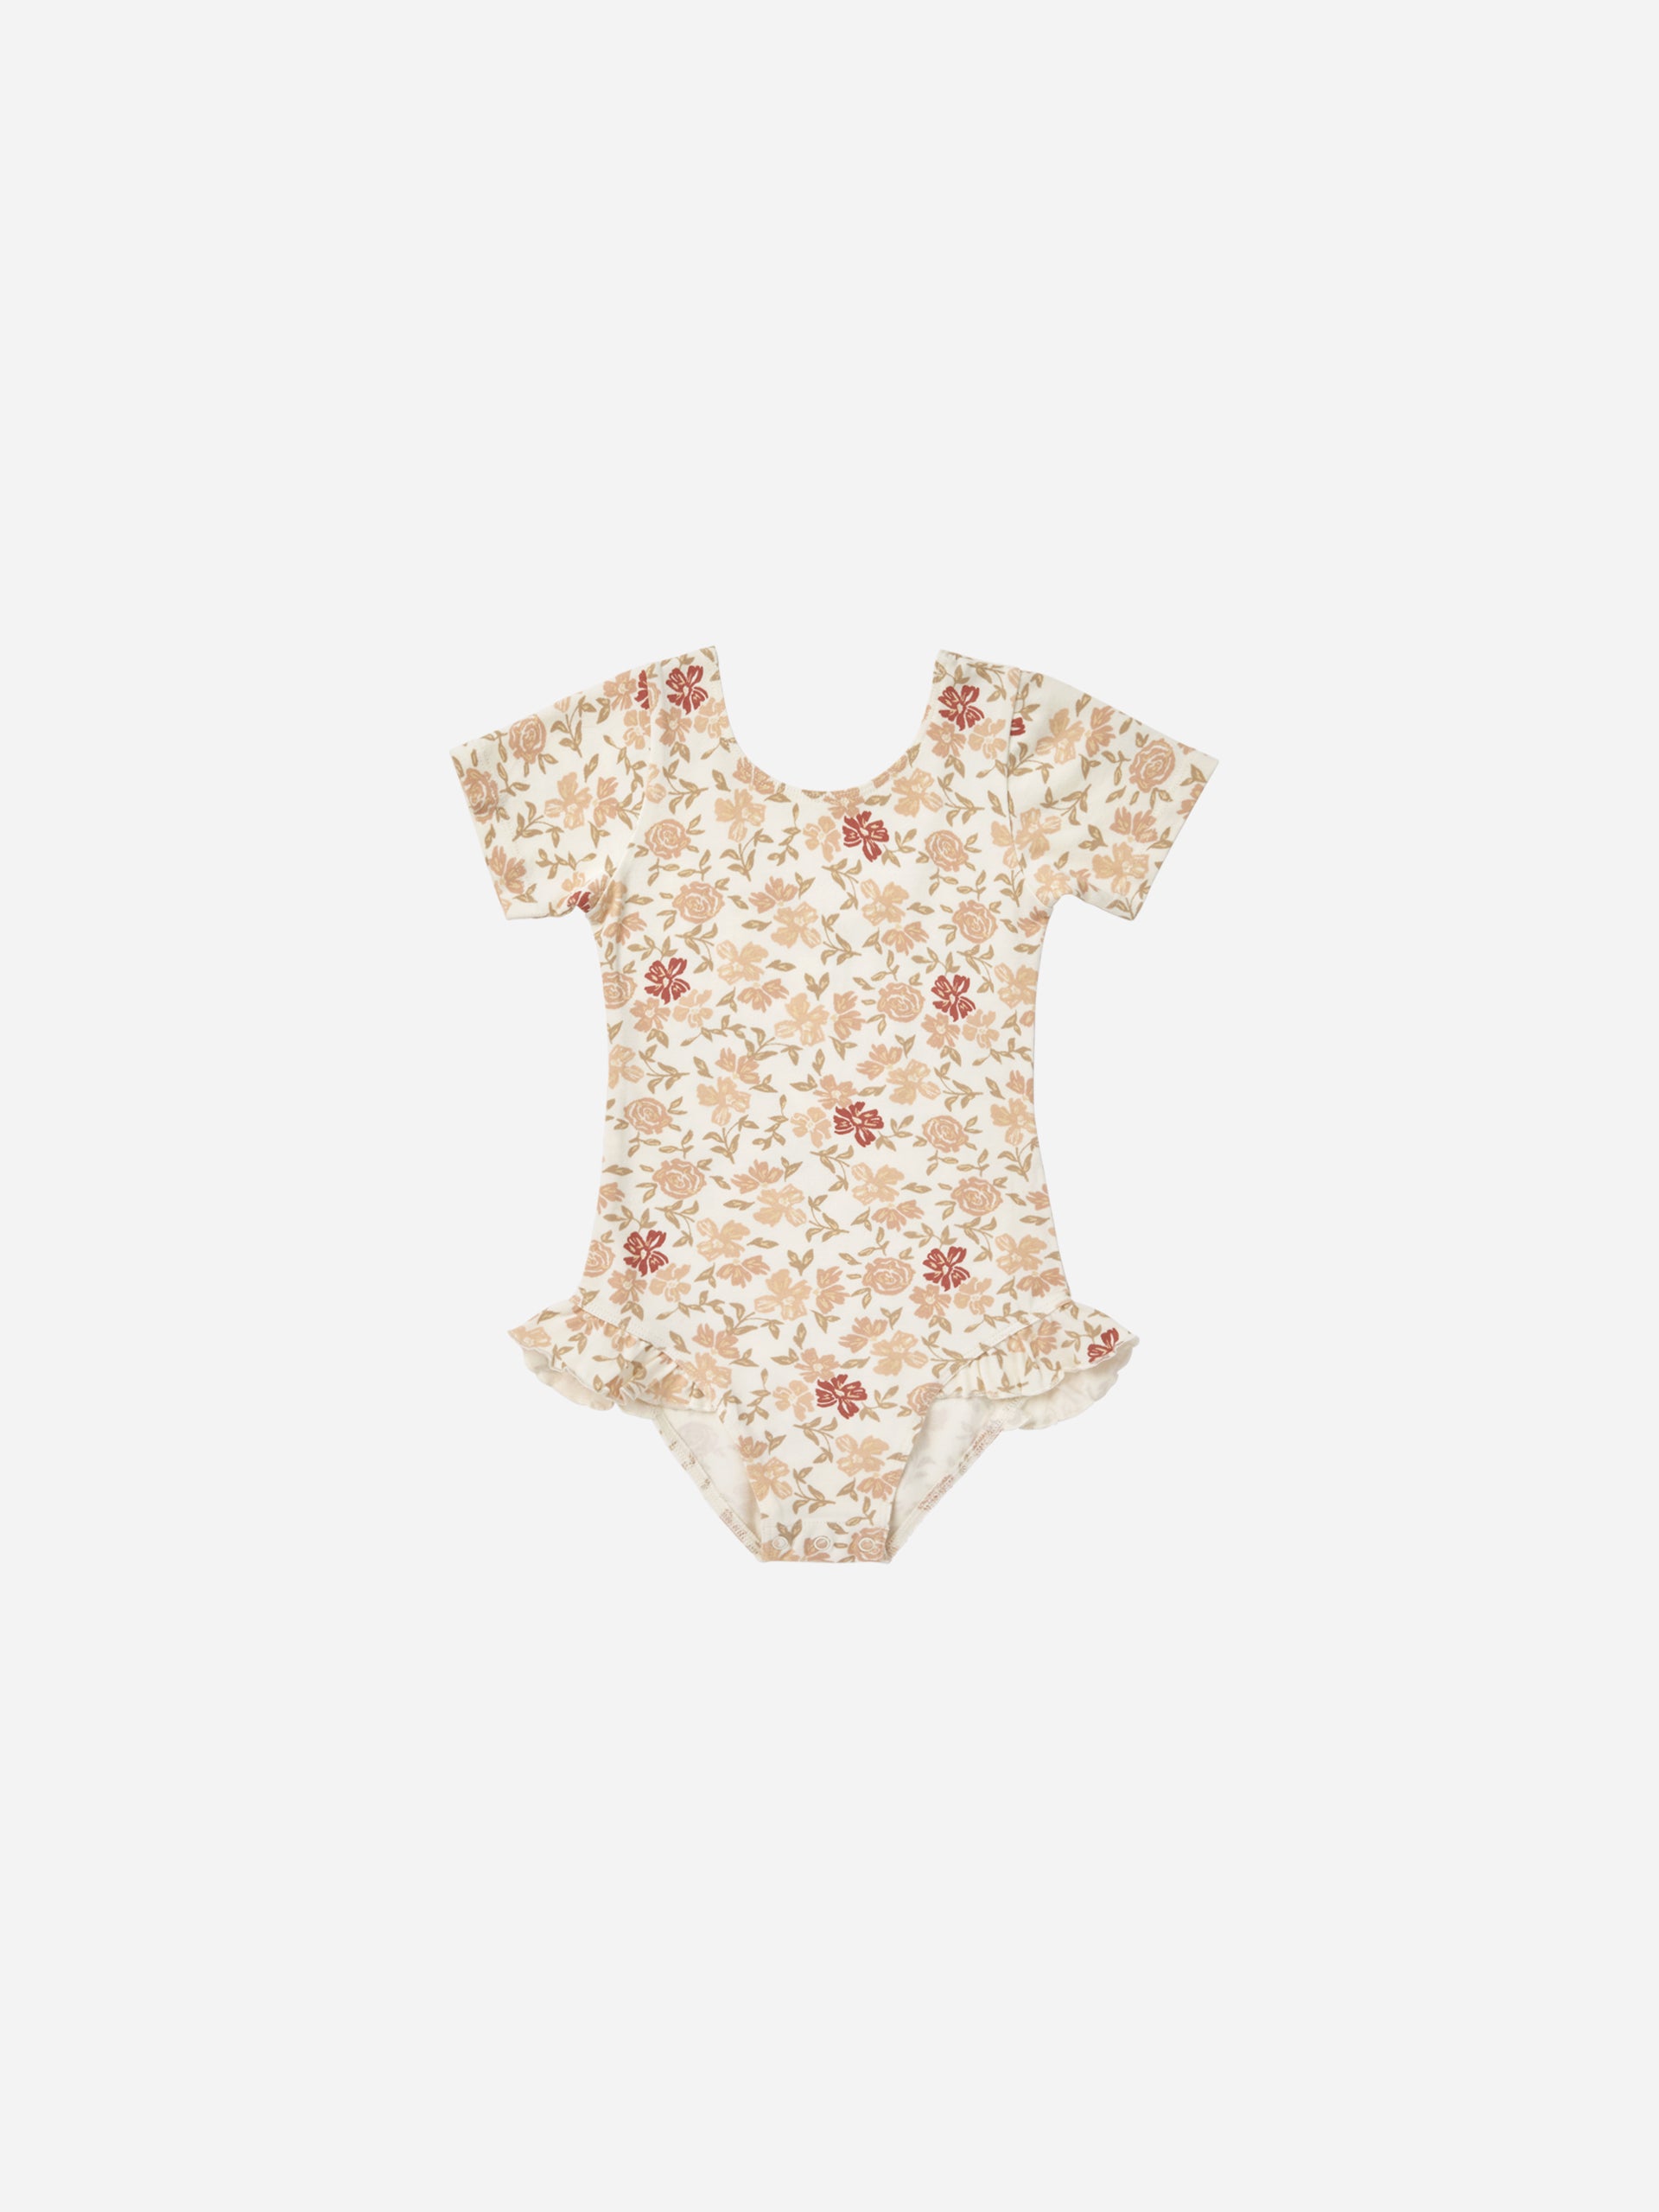 Leotard || Pink Floral - Rylee + Cru | Kids Clothes | Trendy Baby Clothes | Modern Infant Outfits |